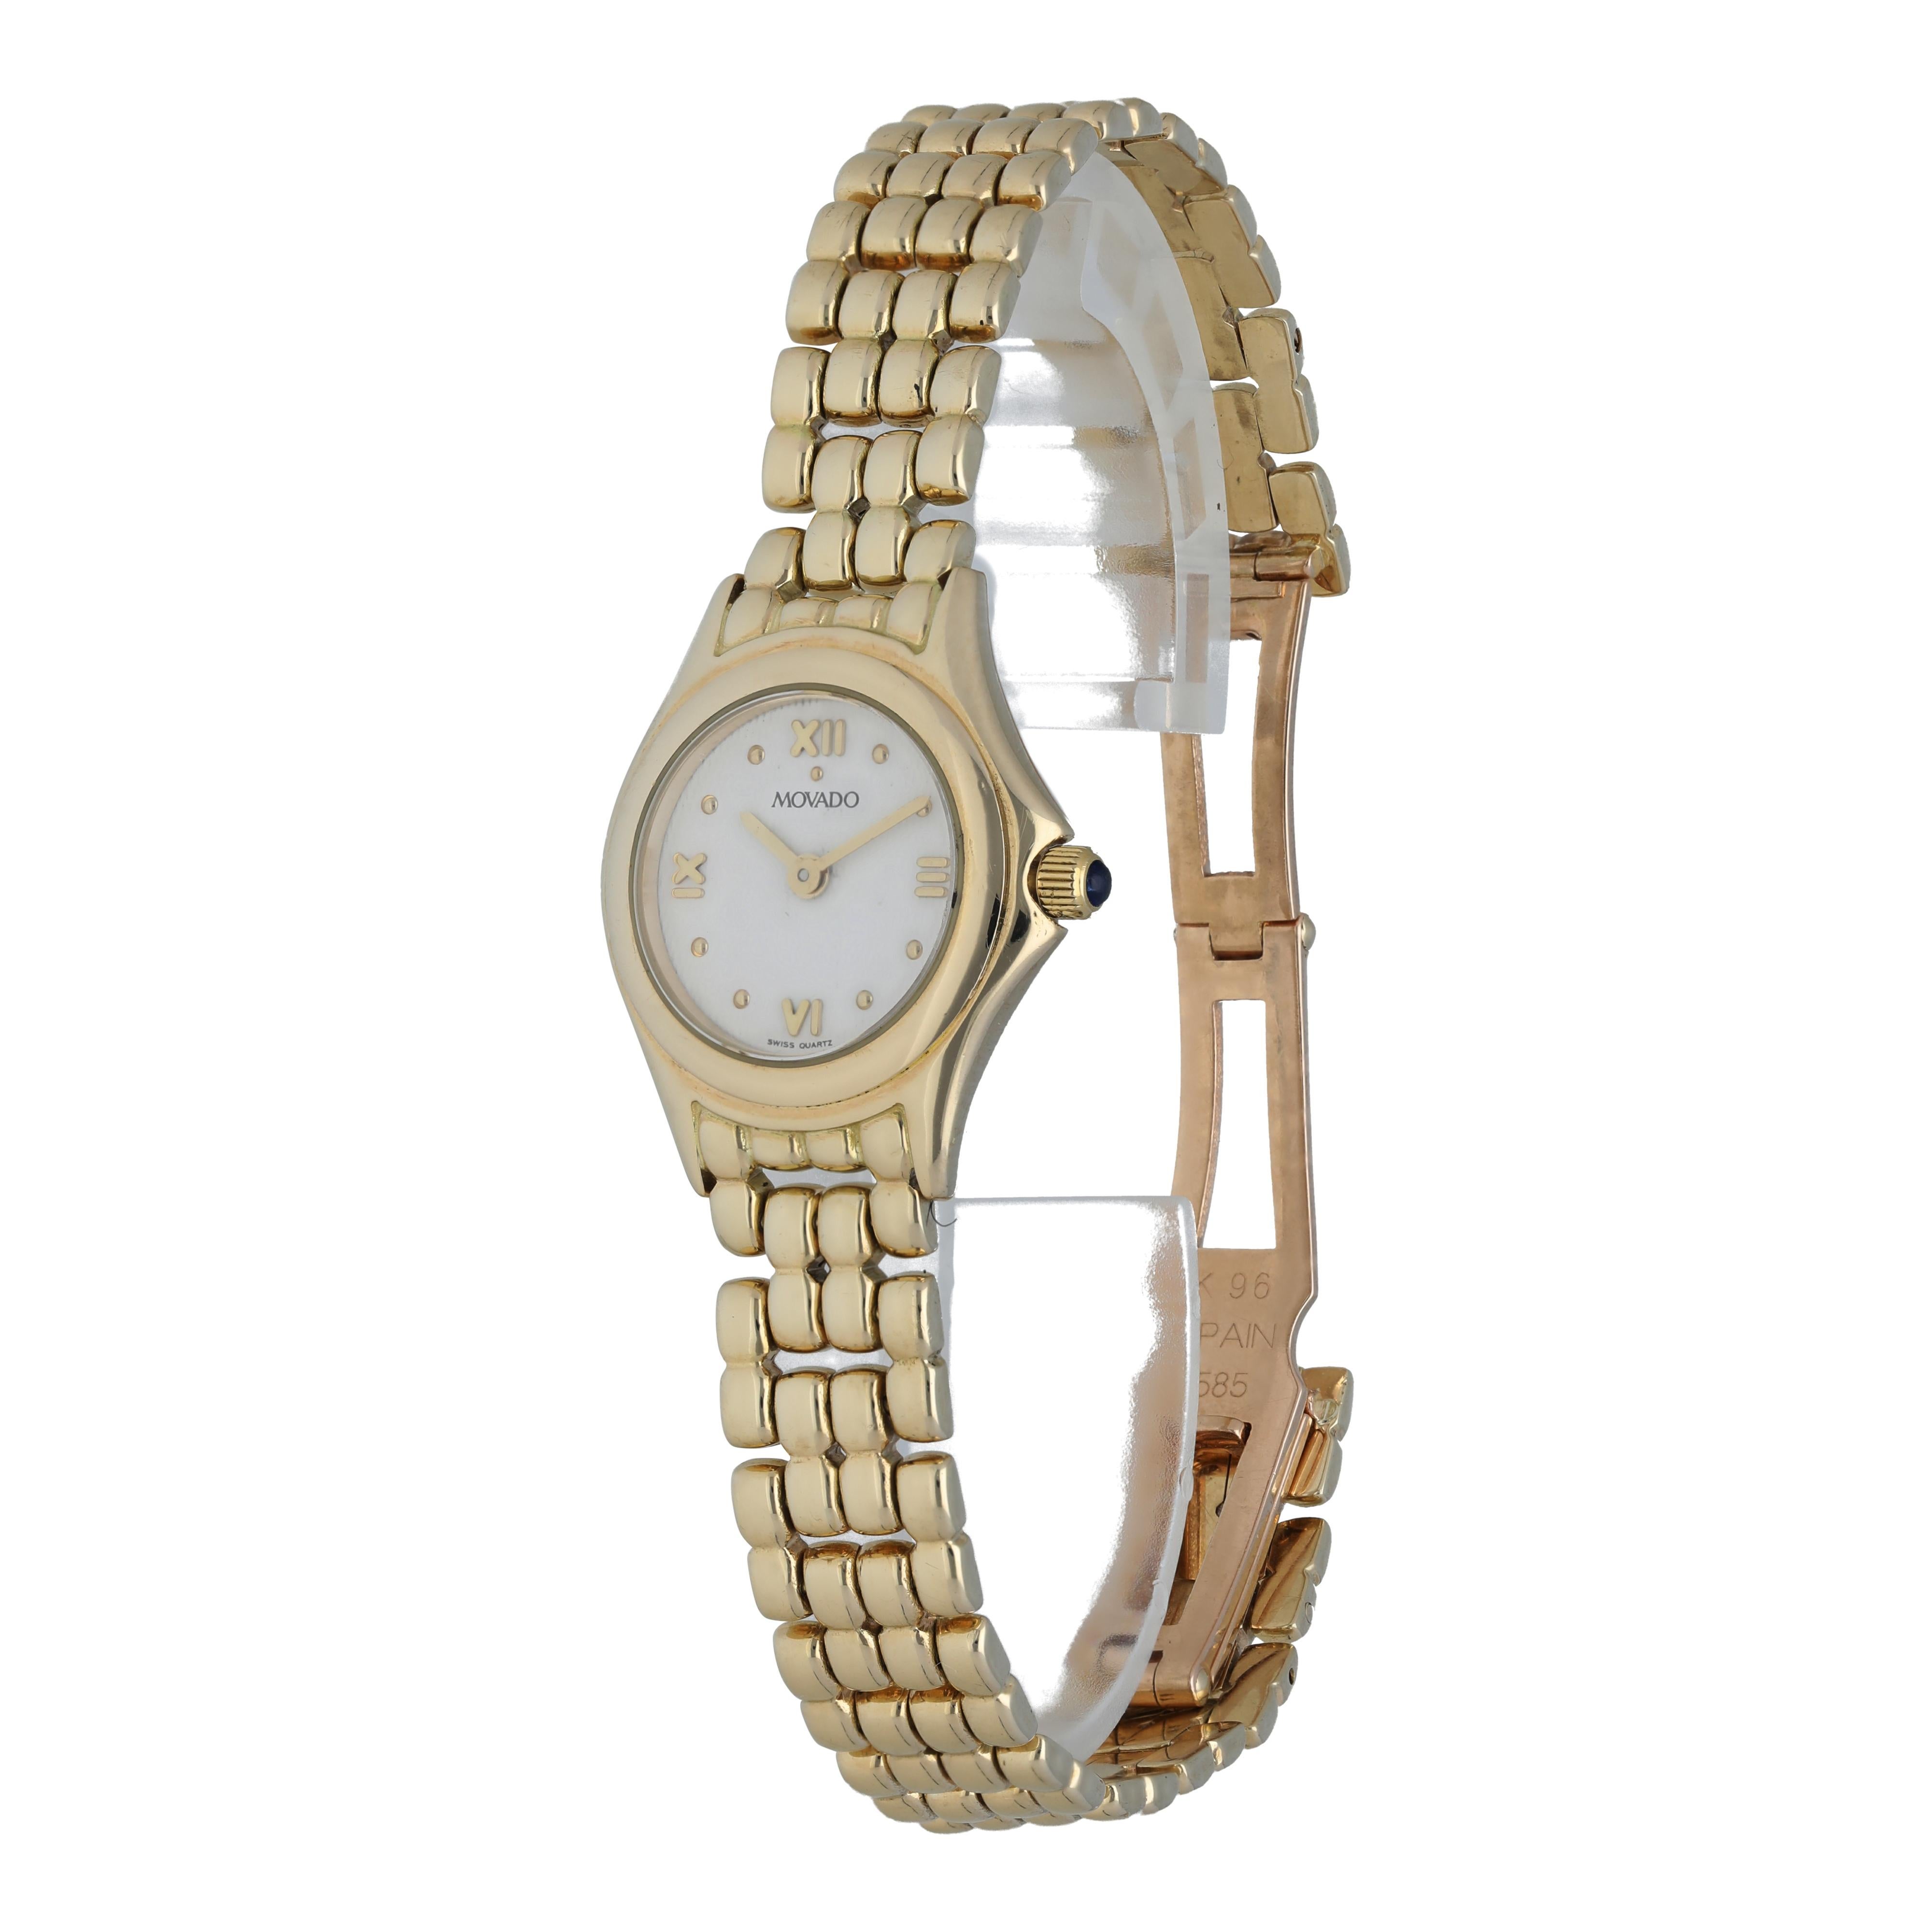 Movado Lumeti 74259811 Ladies Watch. 
20mm Yellow Gold case. 
Yellow Gold smooth bezel. 
White dial with gold hands and Roman numeral hour markers by the 3, 6, 9, and 12 o'clock position. 
Yellow Gold Bracelet with Butterfly Clasp. 
Will fit up to a